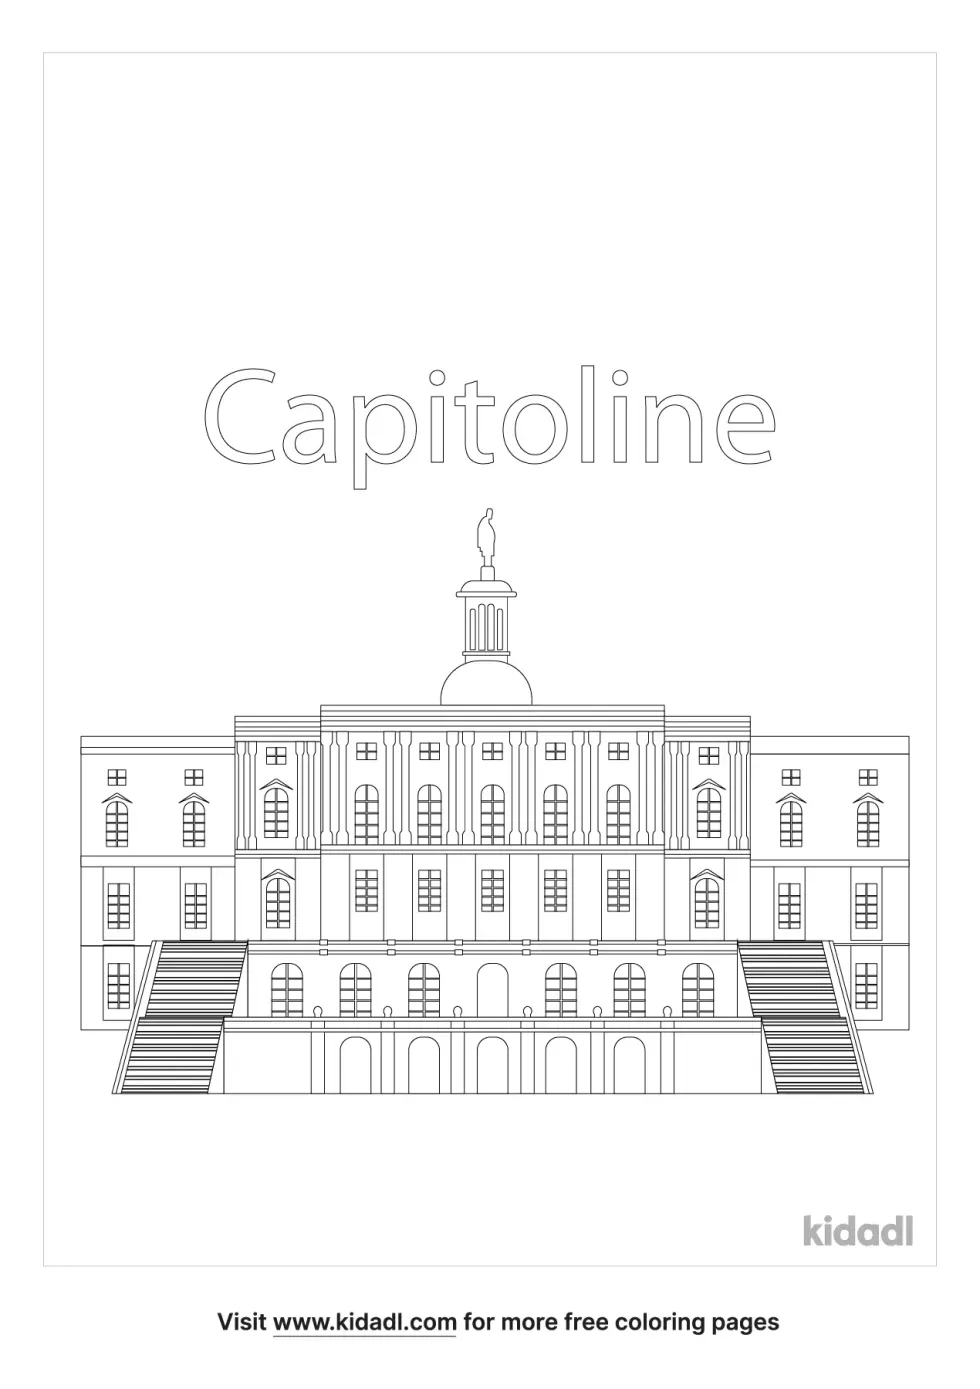 Capitoline Coloring Page